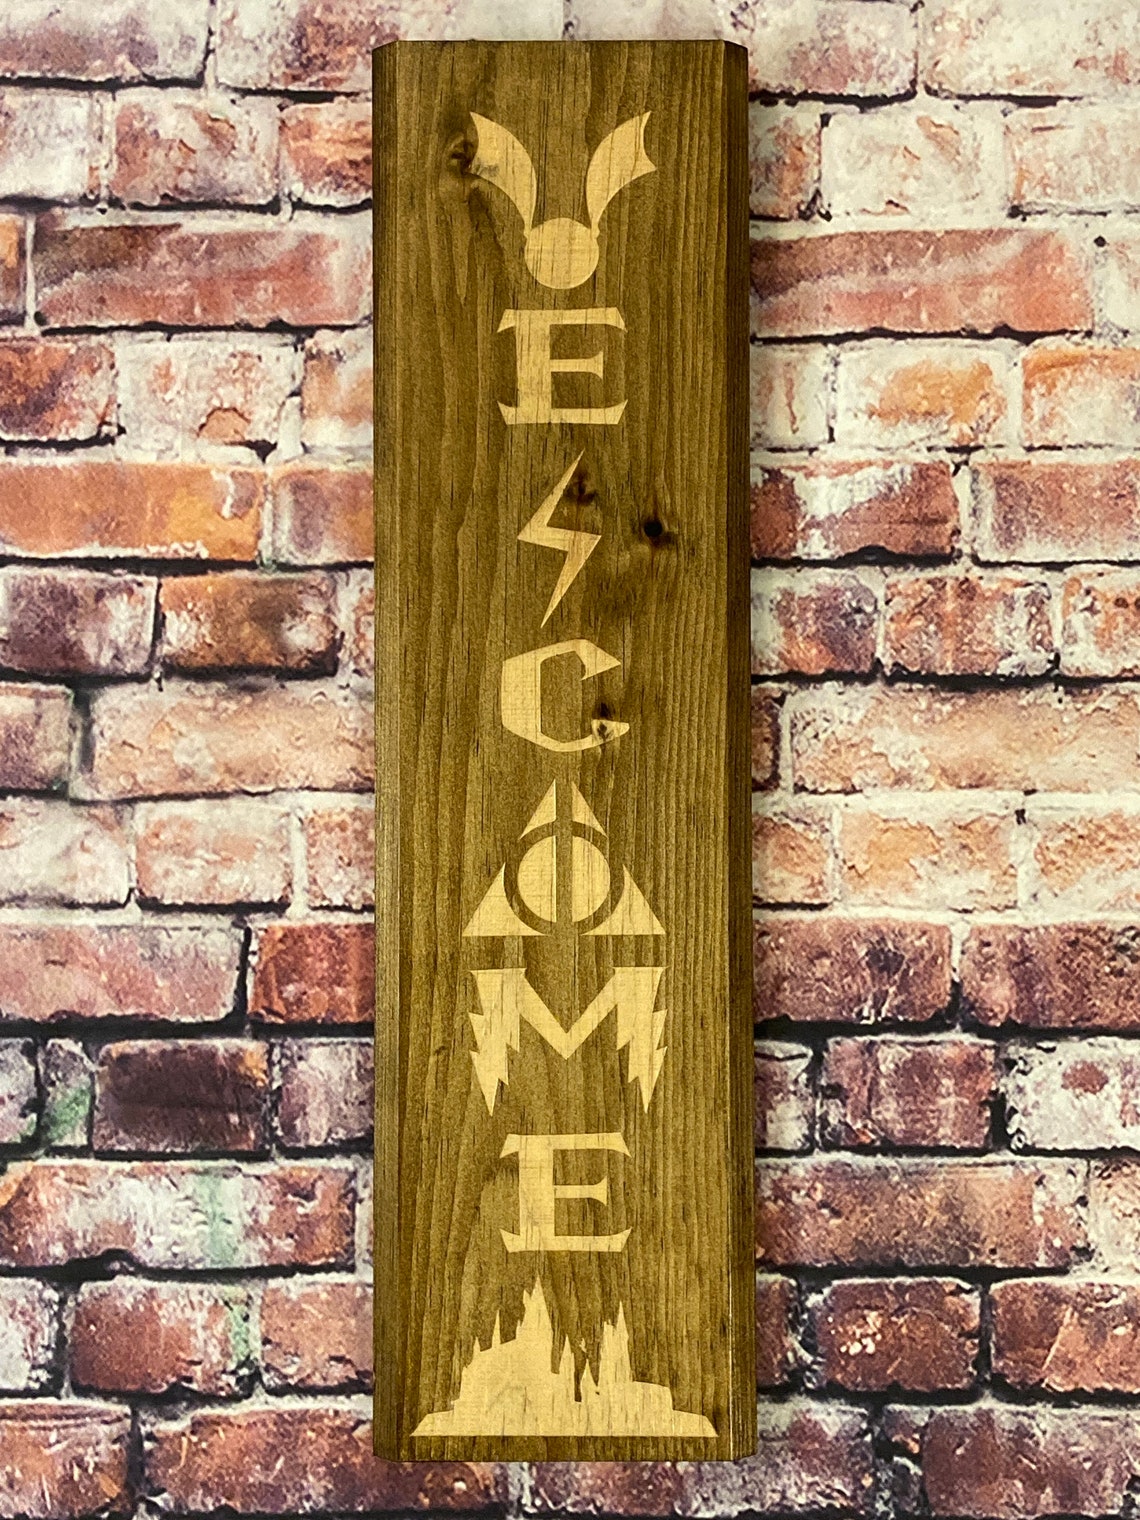 Harry Potter themed Welcome Sign | Etsy